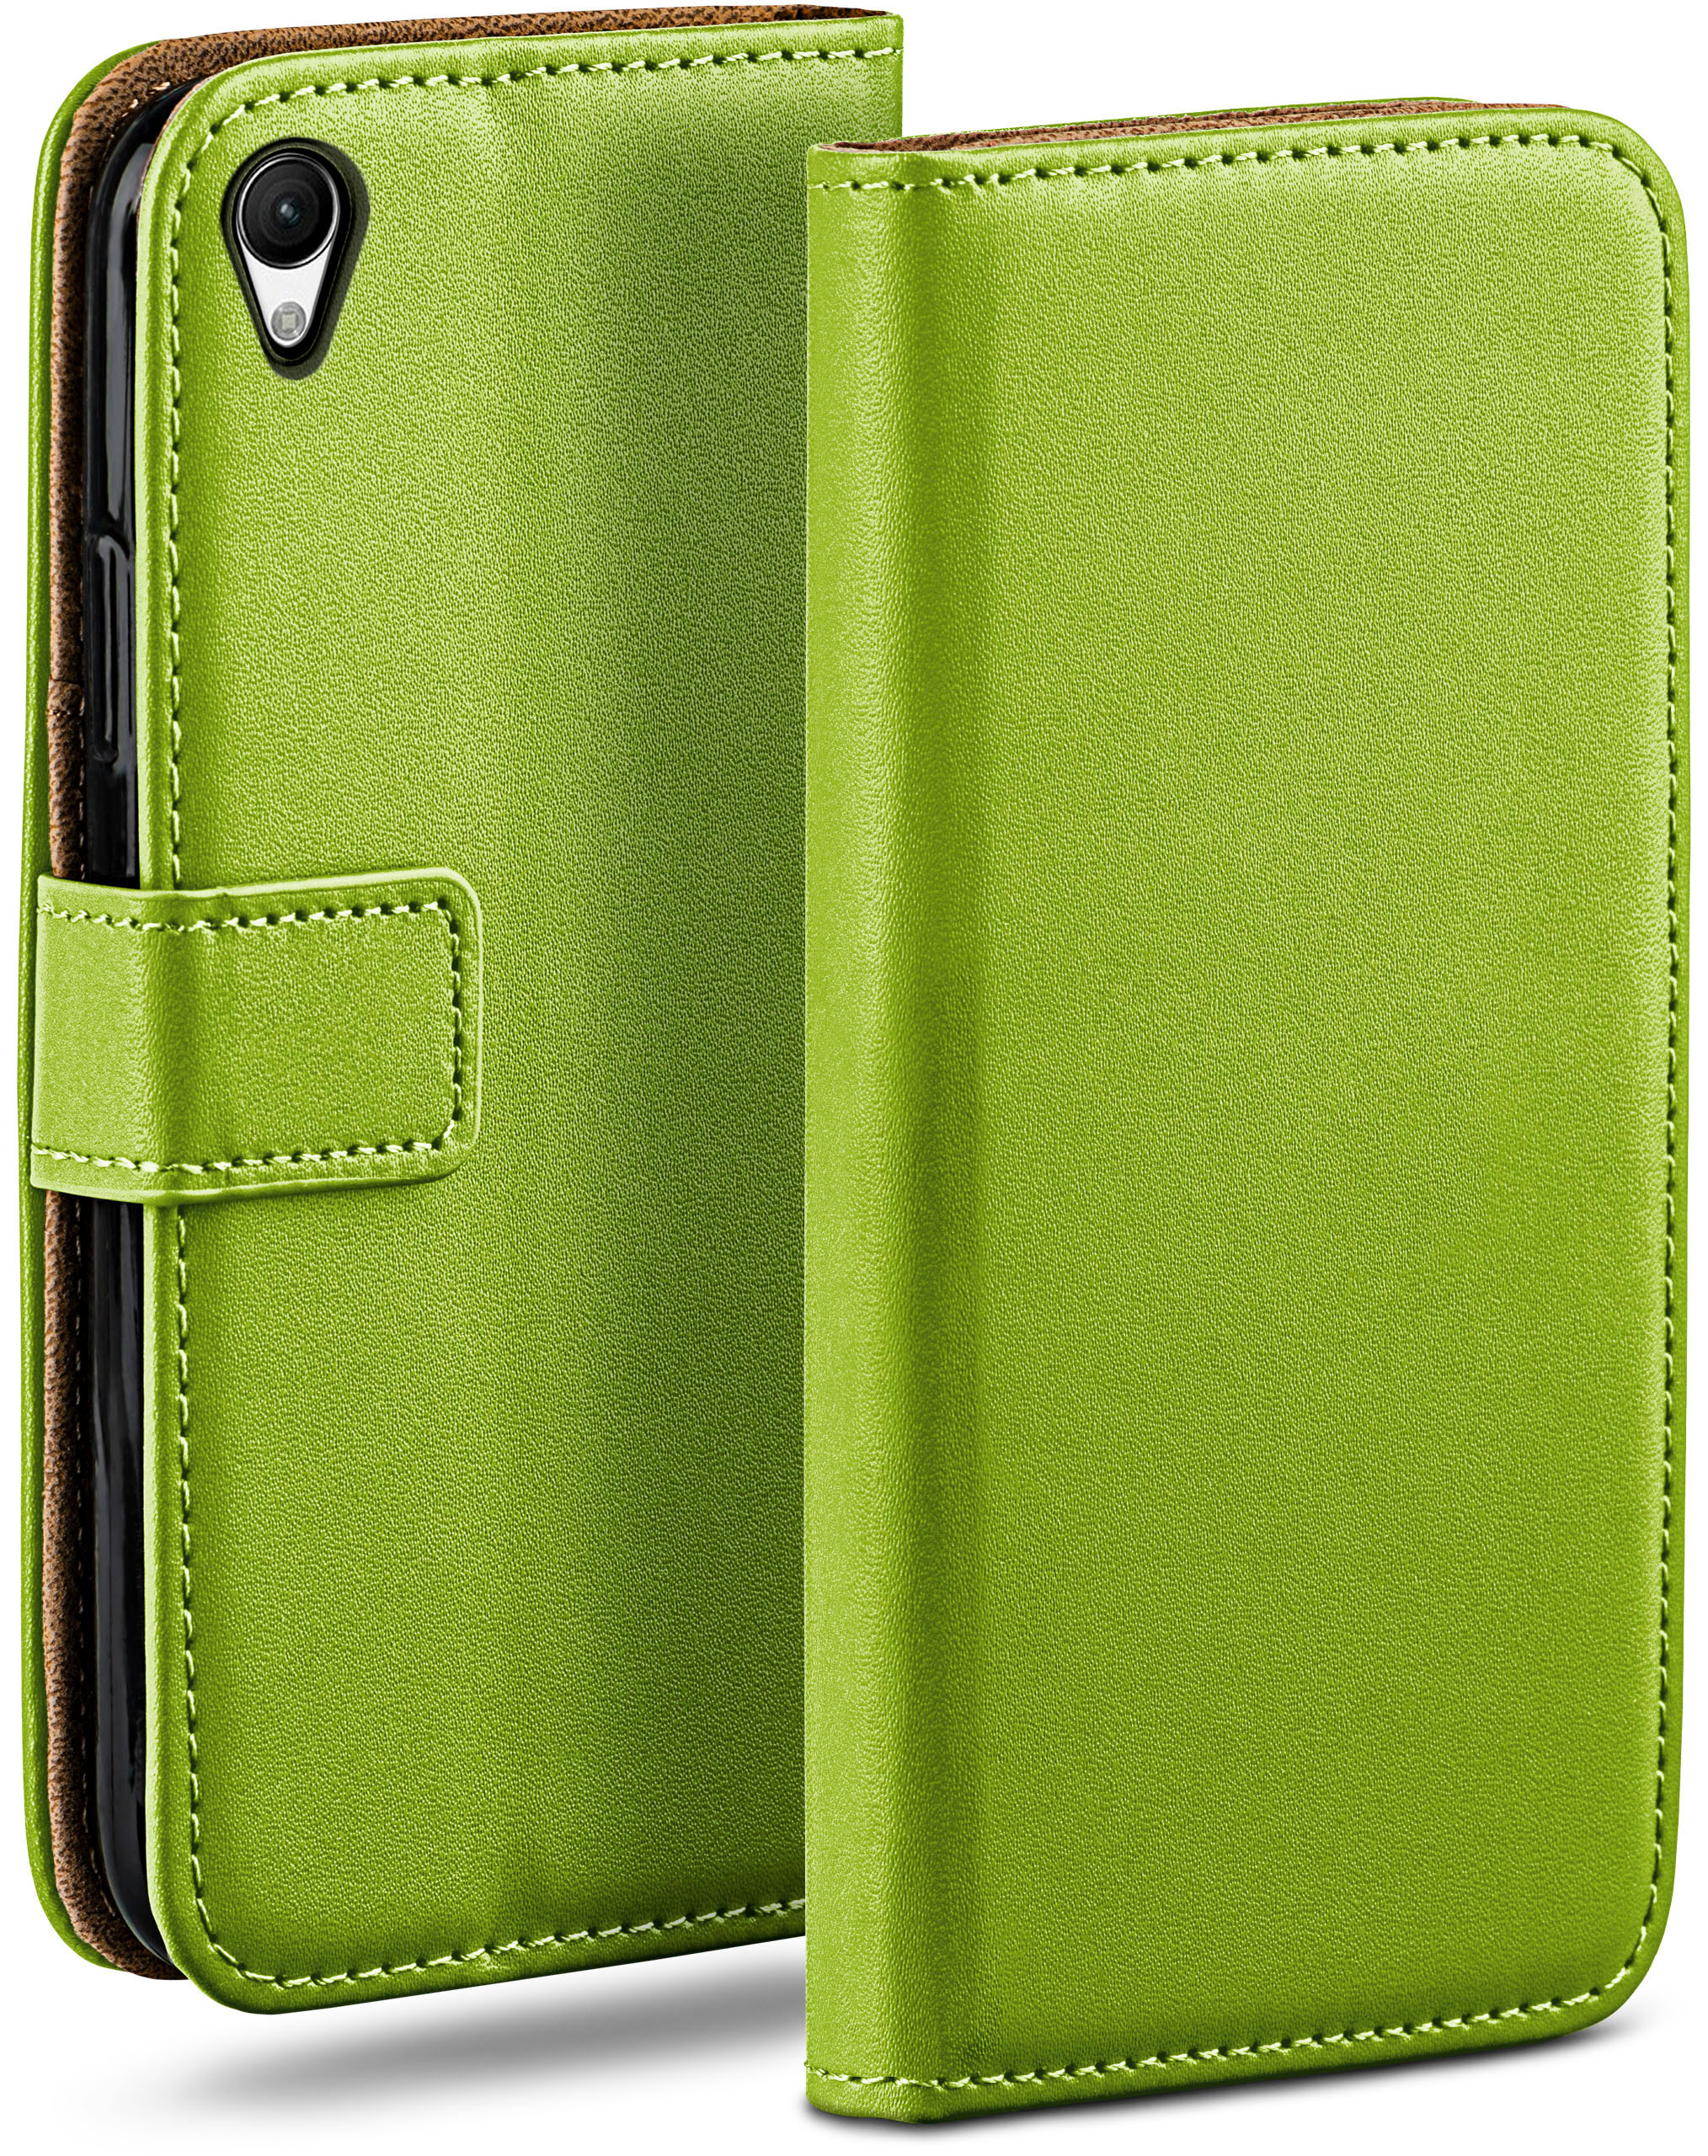 MOEX Xperia Z1, Bookcover, Sony, Lime-Green Case, Book